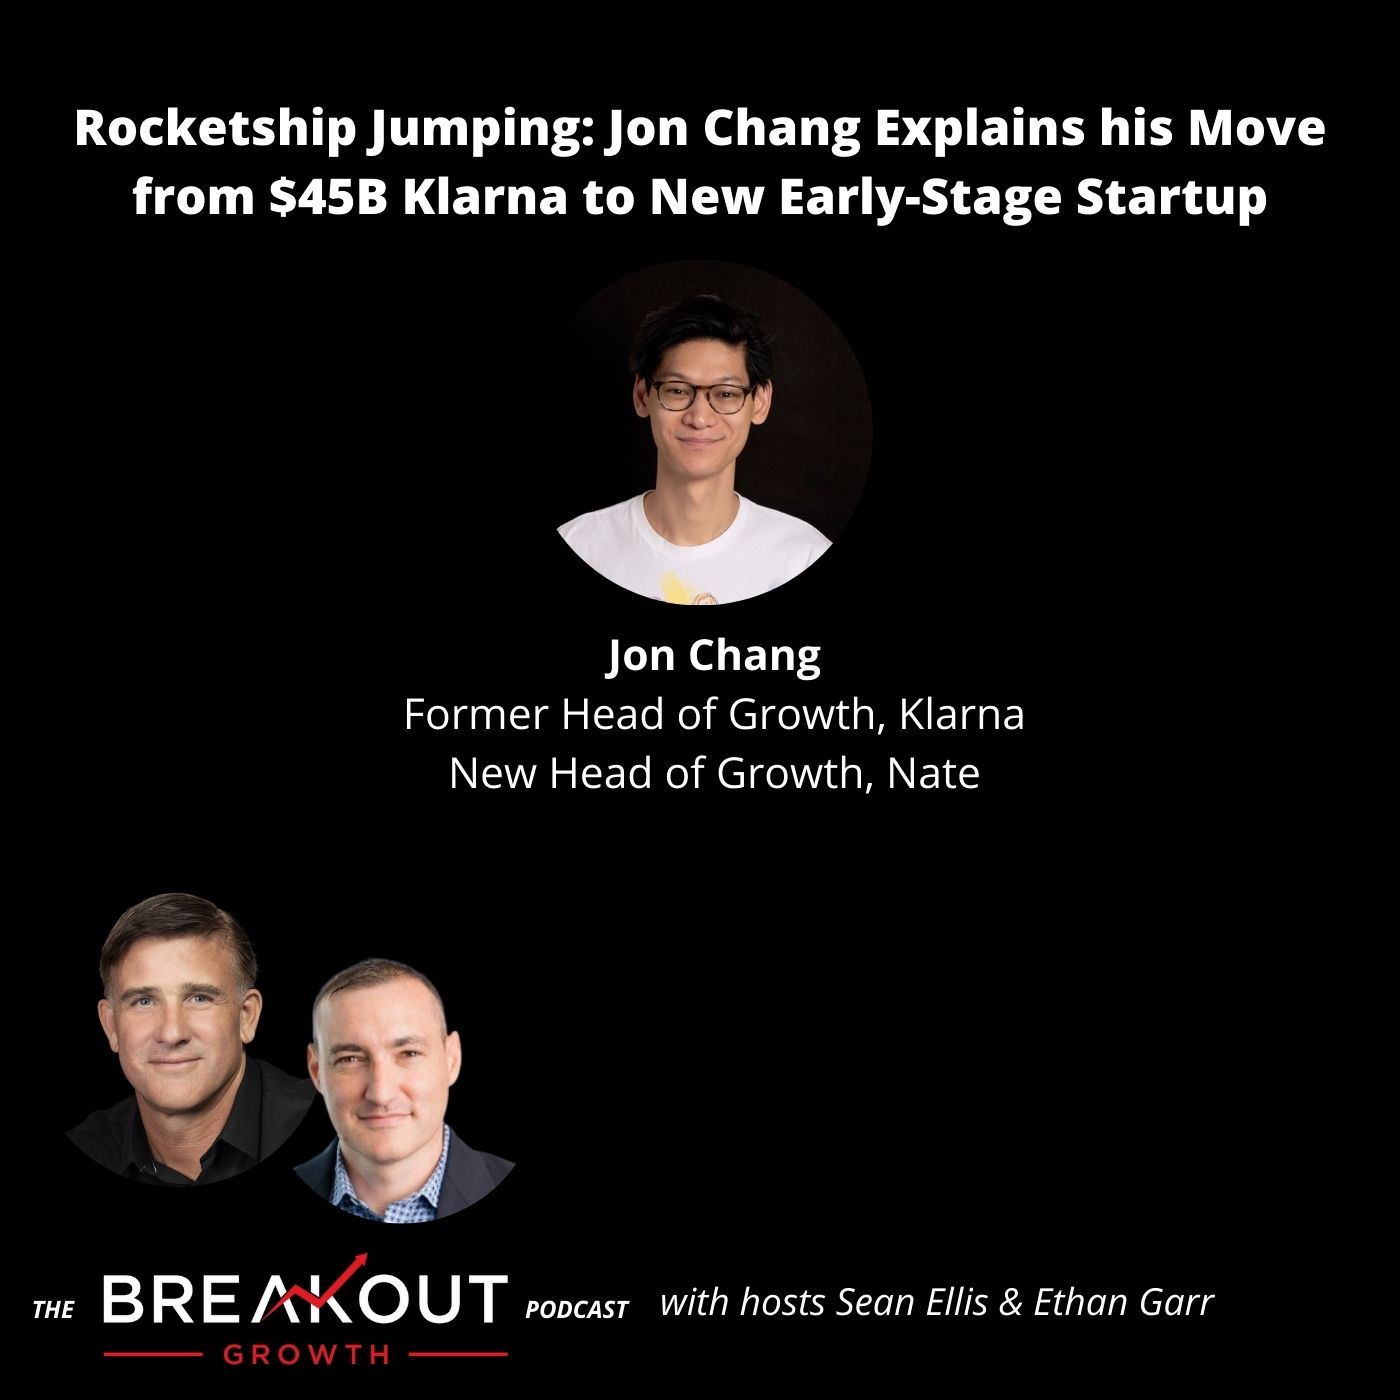 Rocketship Jumping: Jon Chang Explains his Move from $45B Klarna to New Early-Stage Startup